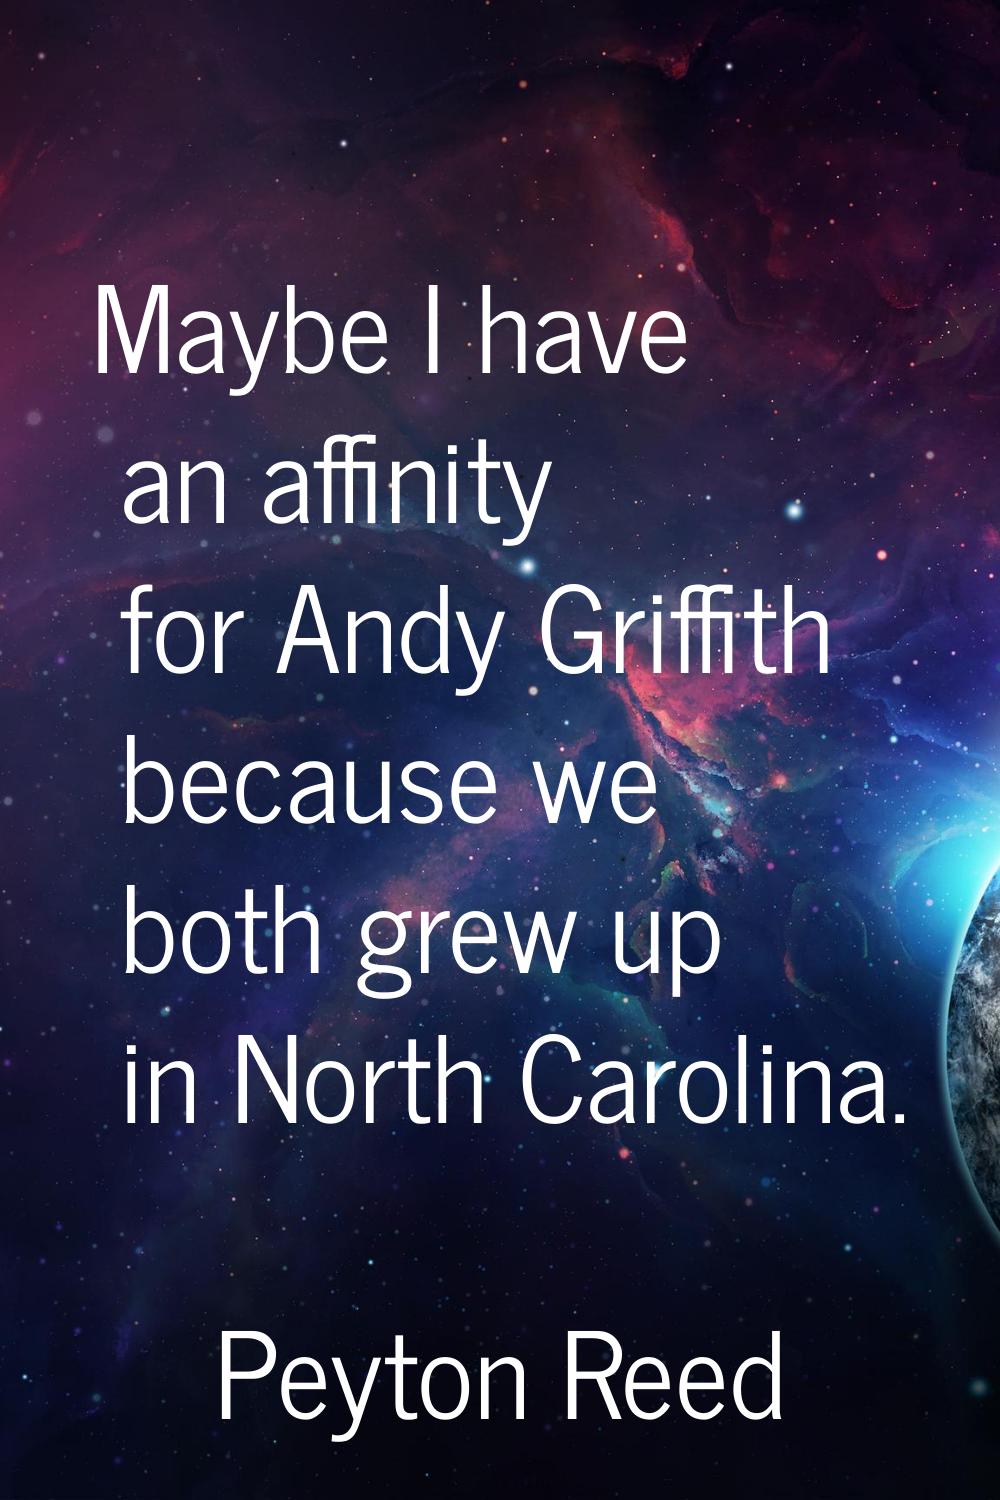 Maybe I have an affinity for Andy Griffith because we both grew up in North Carolina.